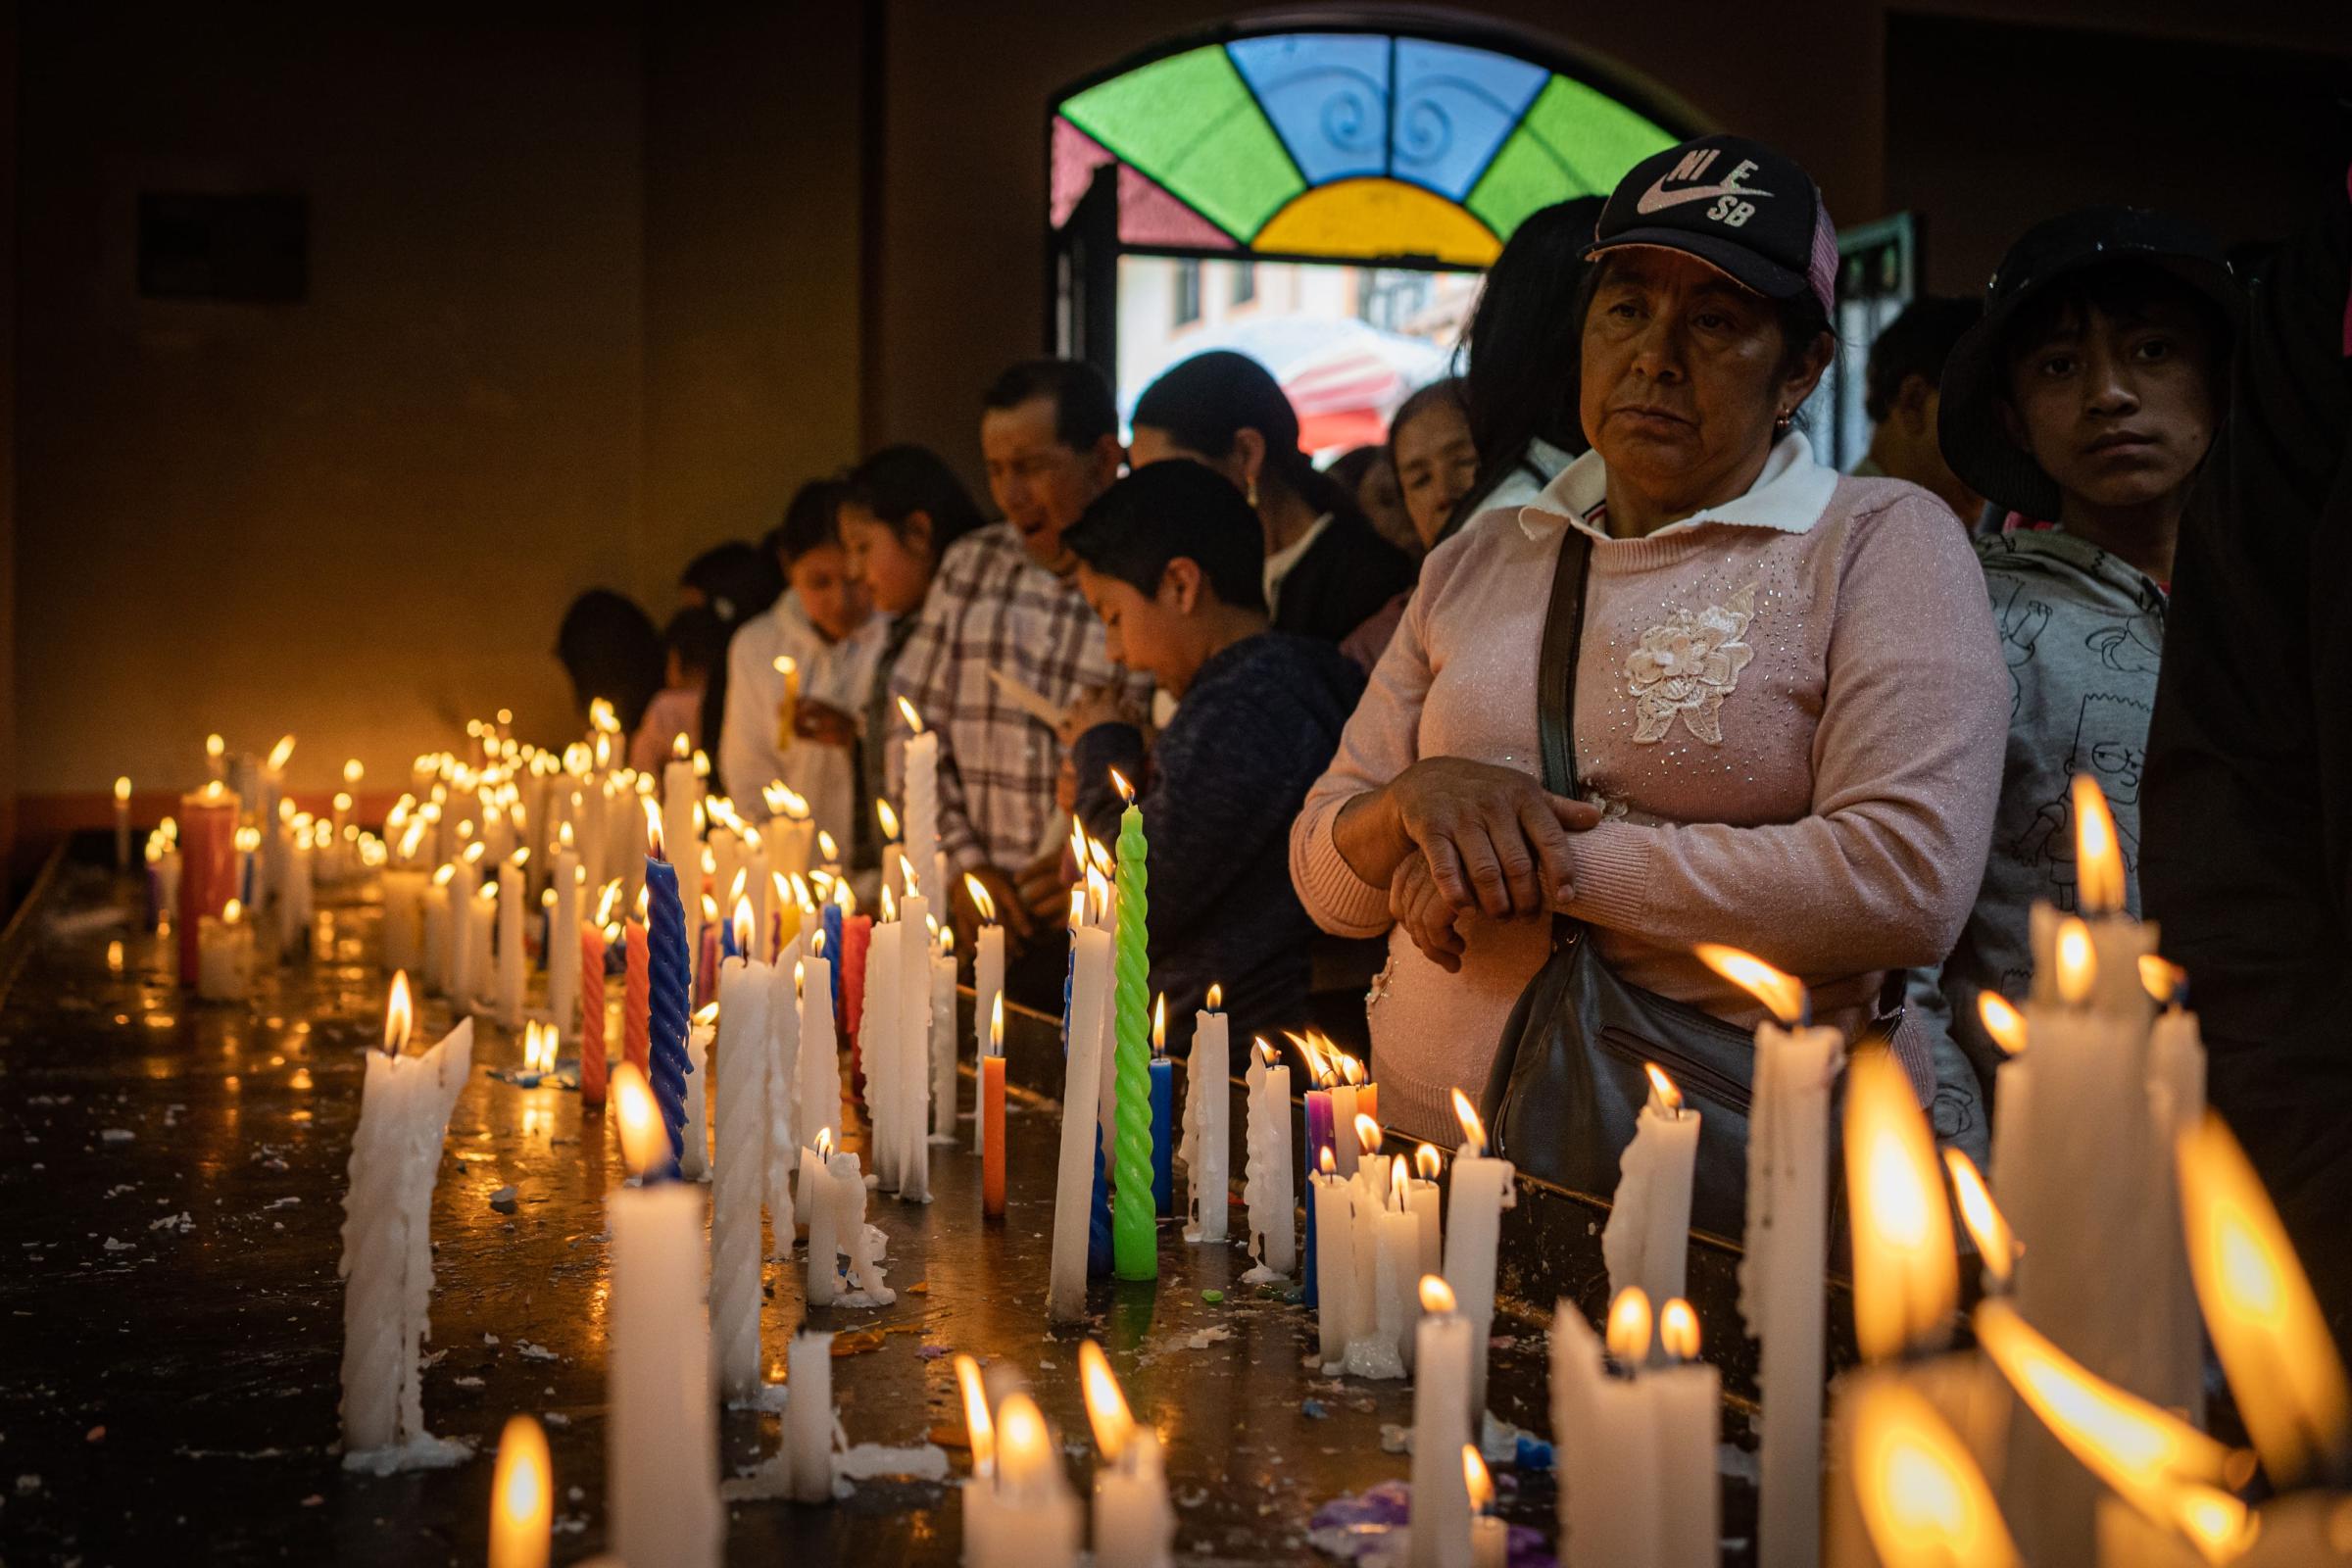 Pilgrims flock to church in Ecuador to ask ‘Christ of Migrants’ for protection of relatives in migration journeys to US